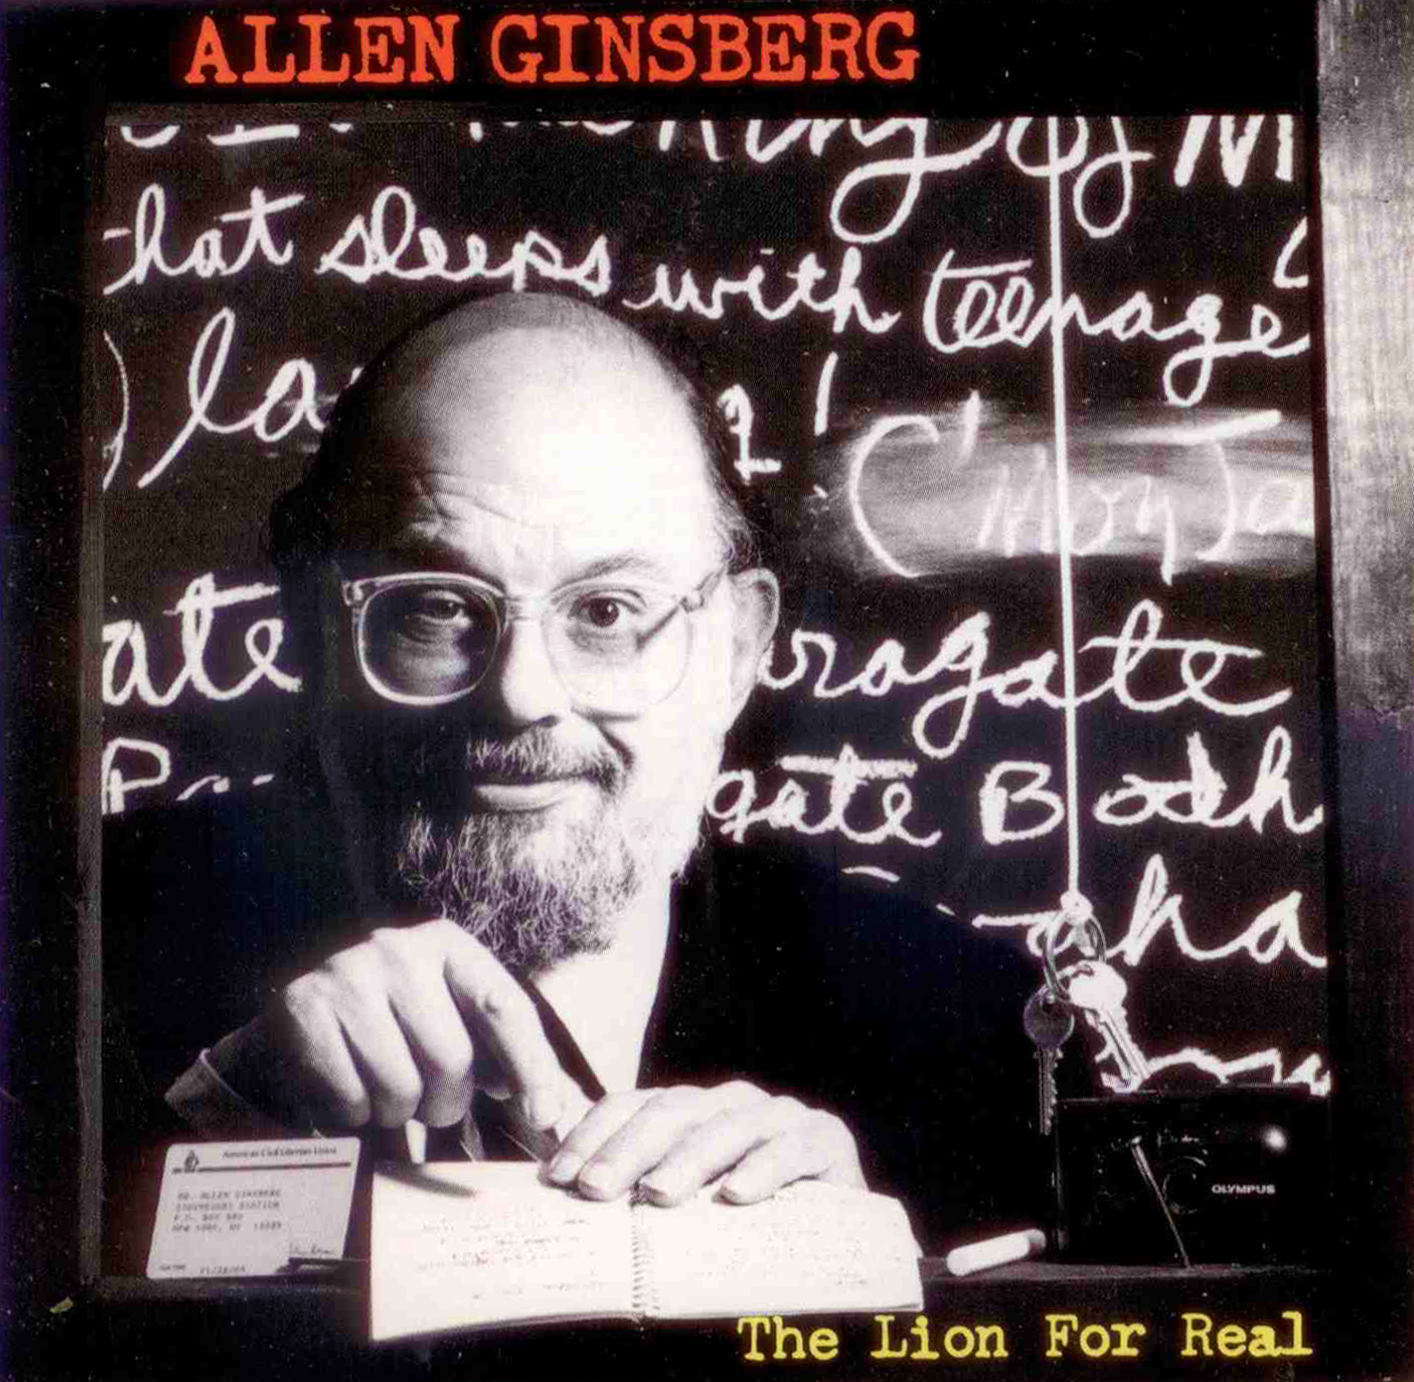 Allen Ginsberg - The Lion For Real - 1997